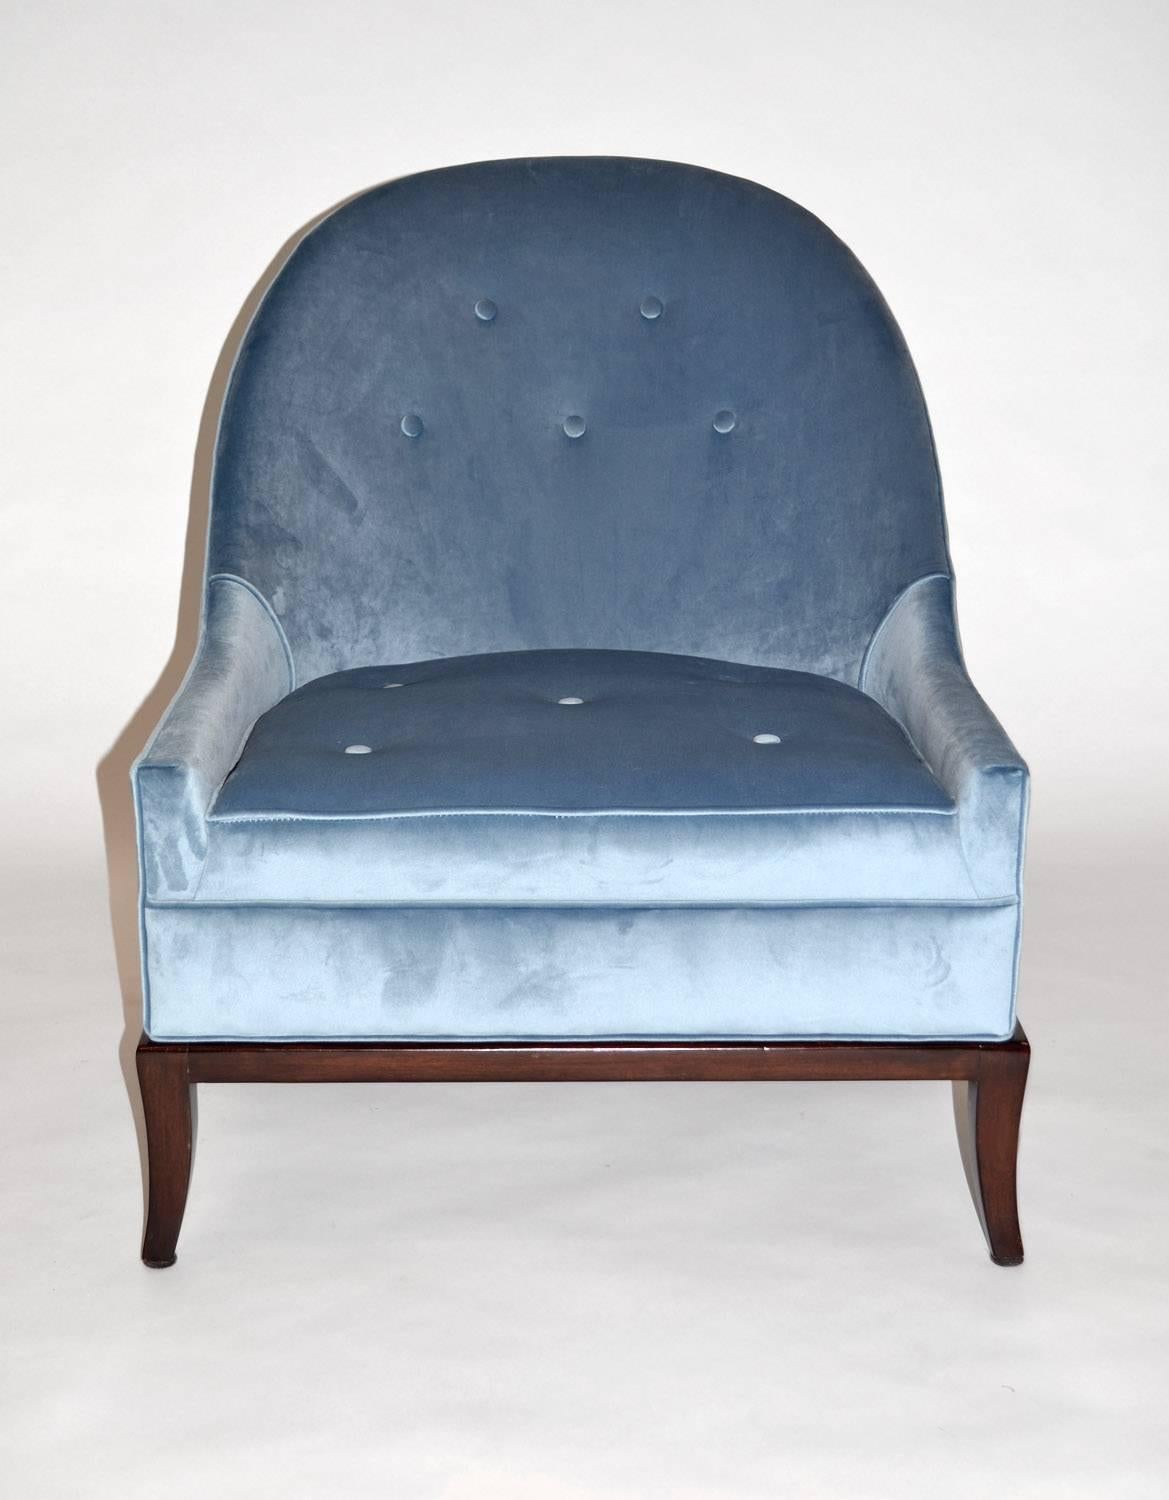 Pair of rare slipper or lounge chairs by T.H. Robsjohn-Gibbings for Widdicomb. Beautiful pair of model 2043 slipper or lounge chairs on dark walnut base newly upholstered in crushed blue velvet.